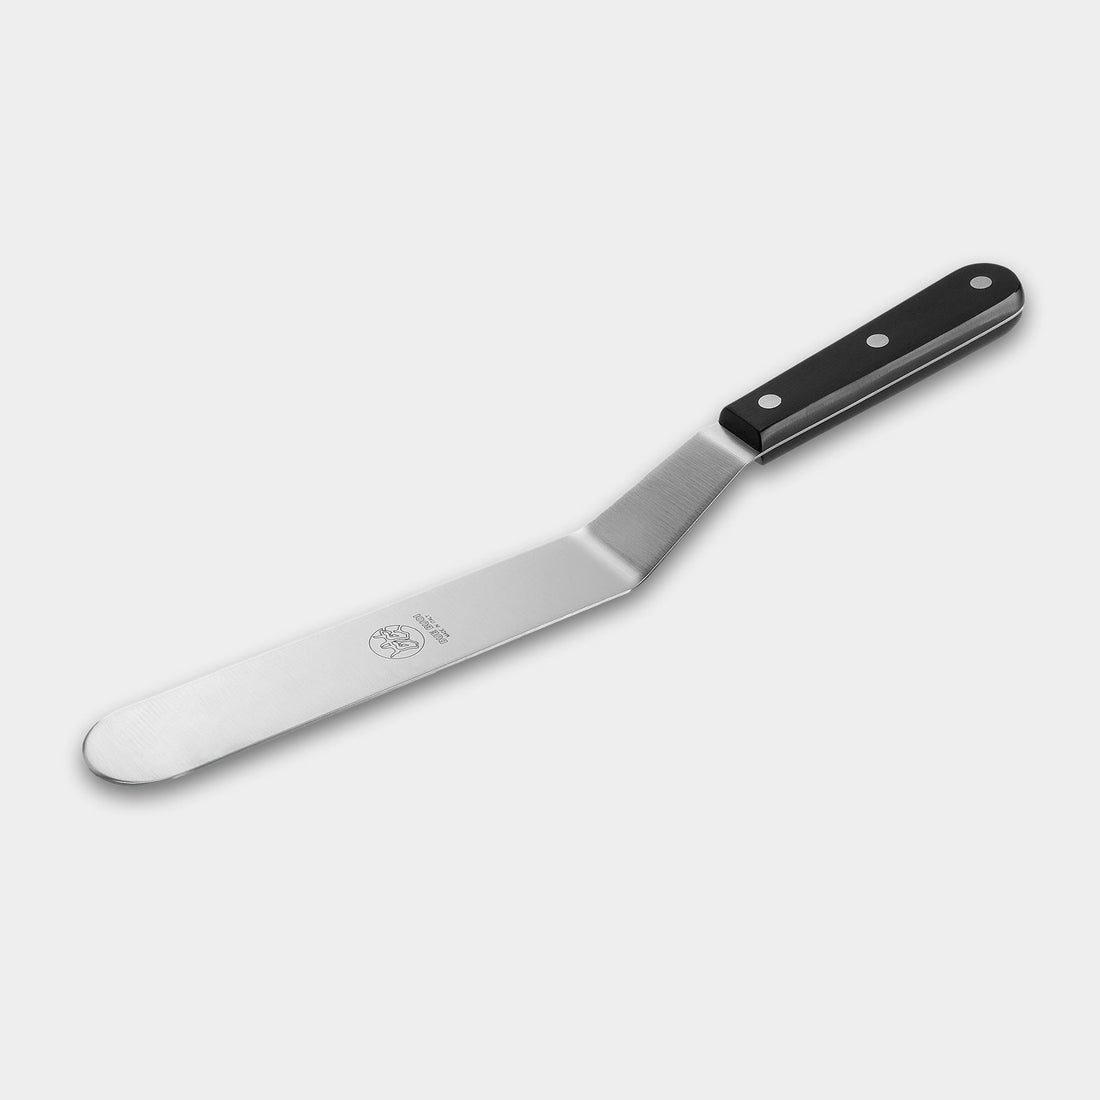 Offset Icing Spatula - Black Technical Polymer Handle